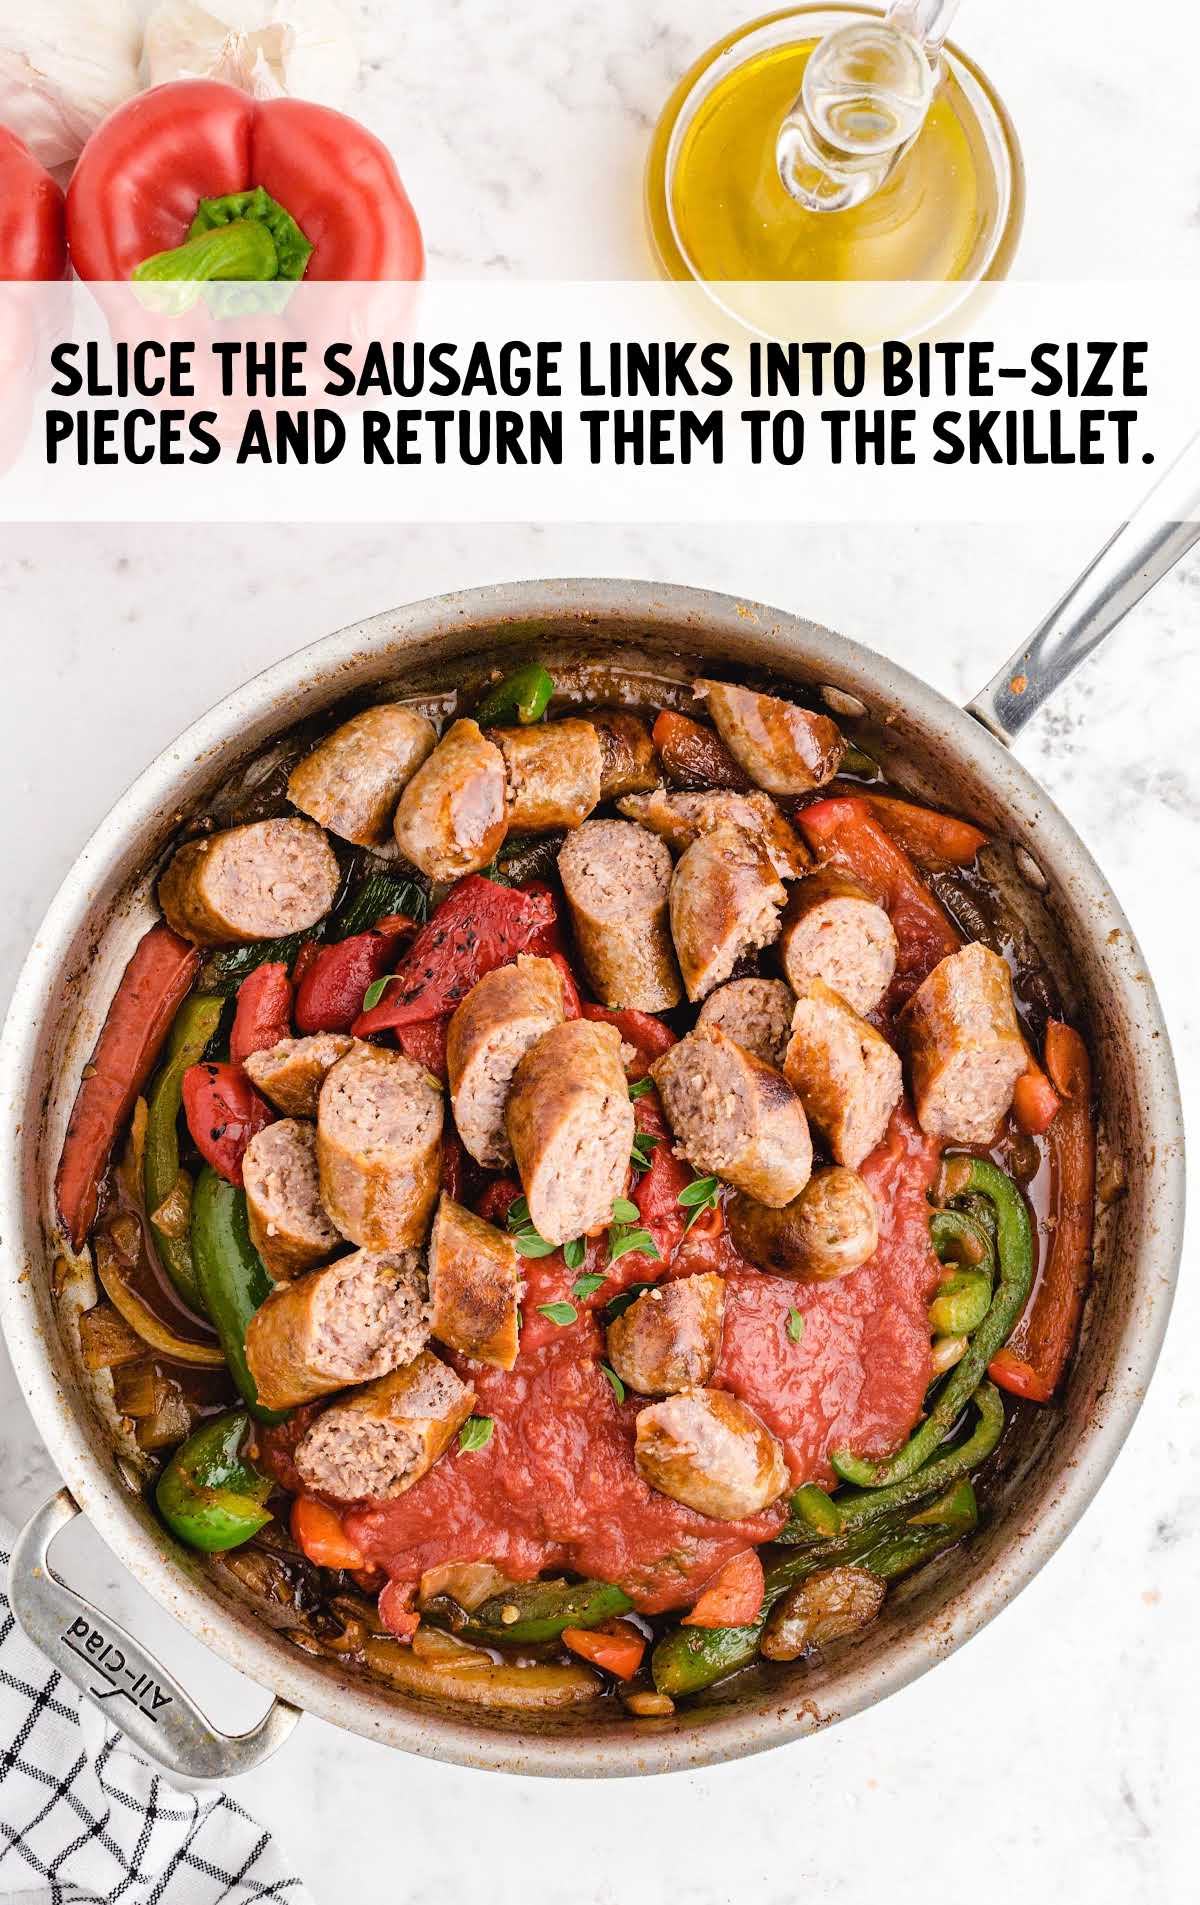 bite-sized pieces of sausage added to the skillet